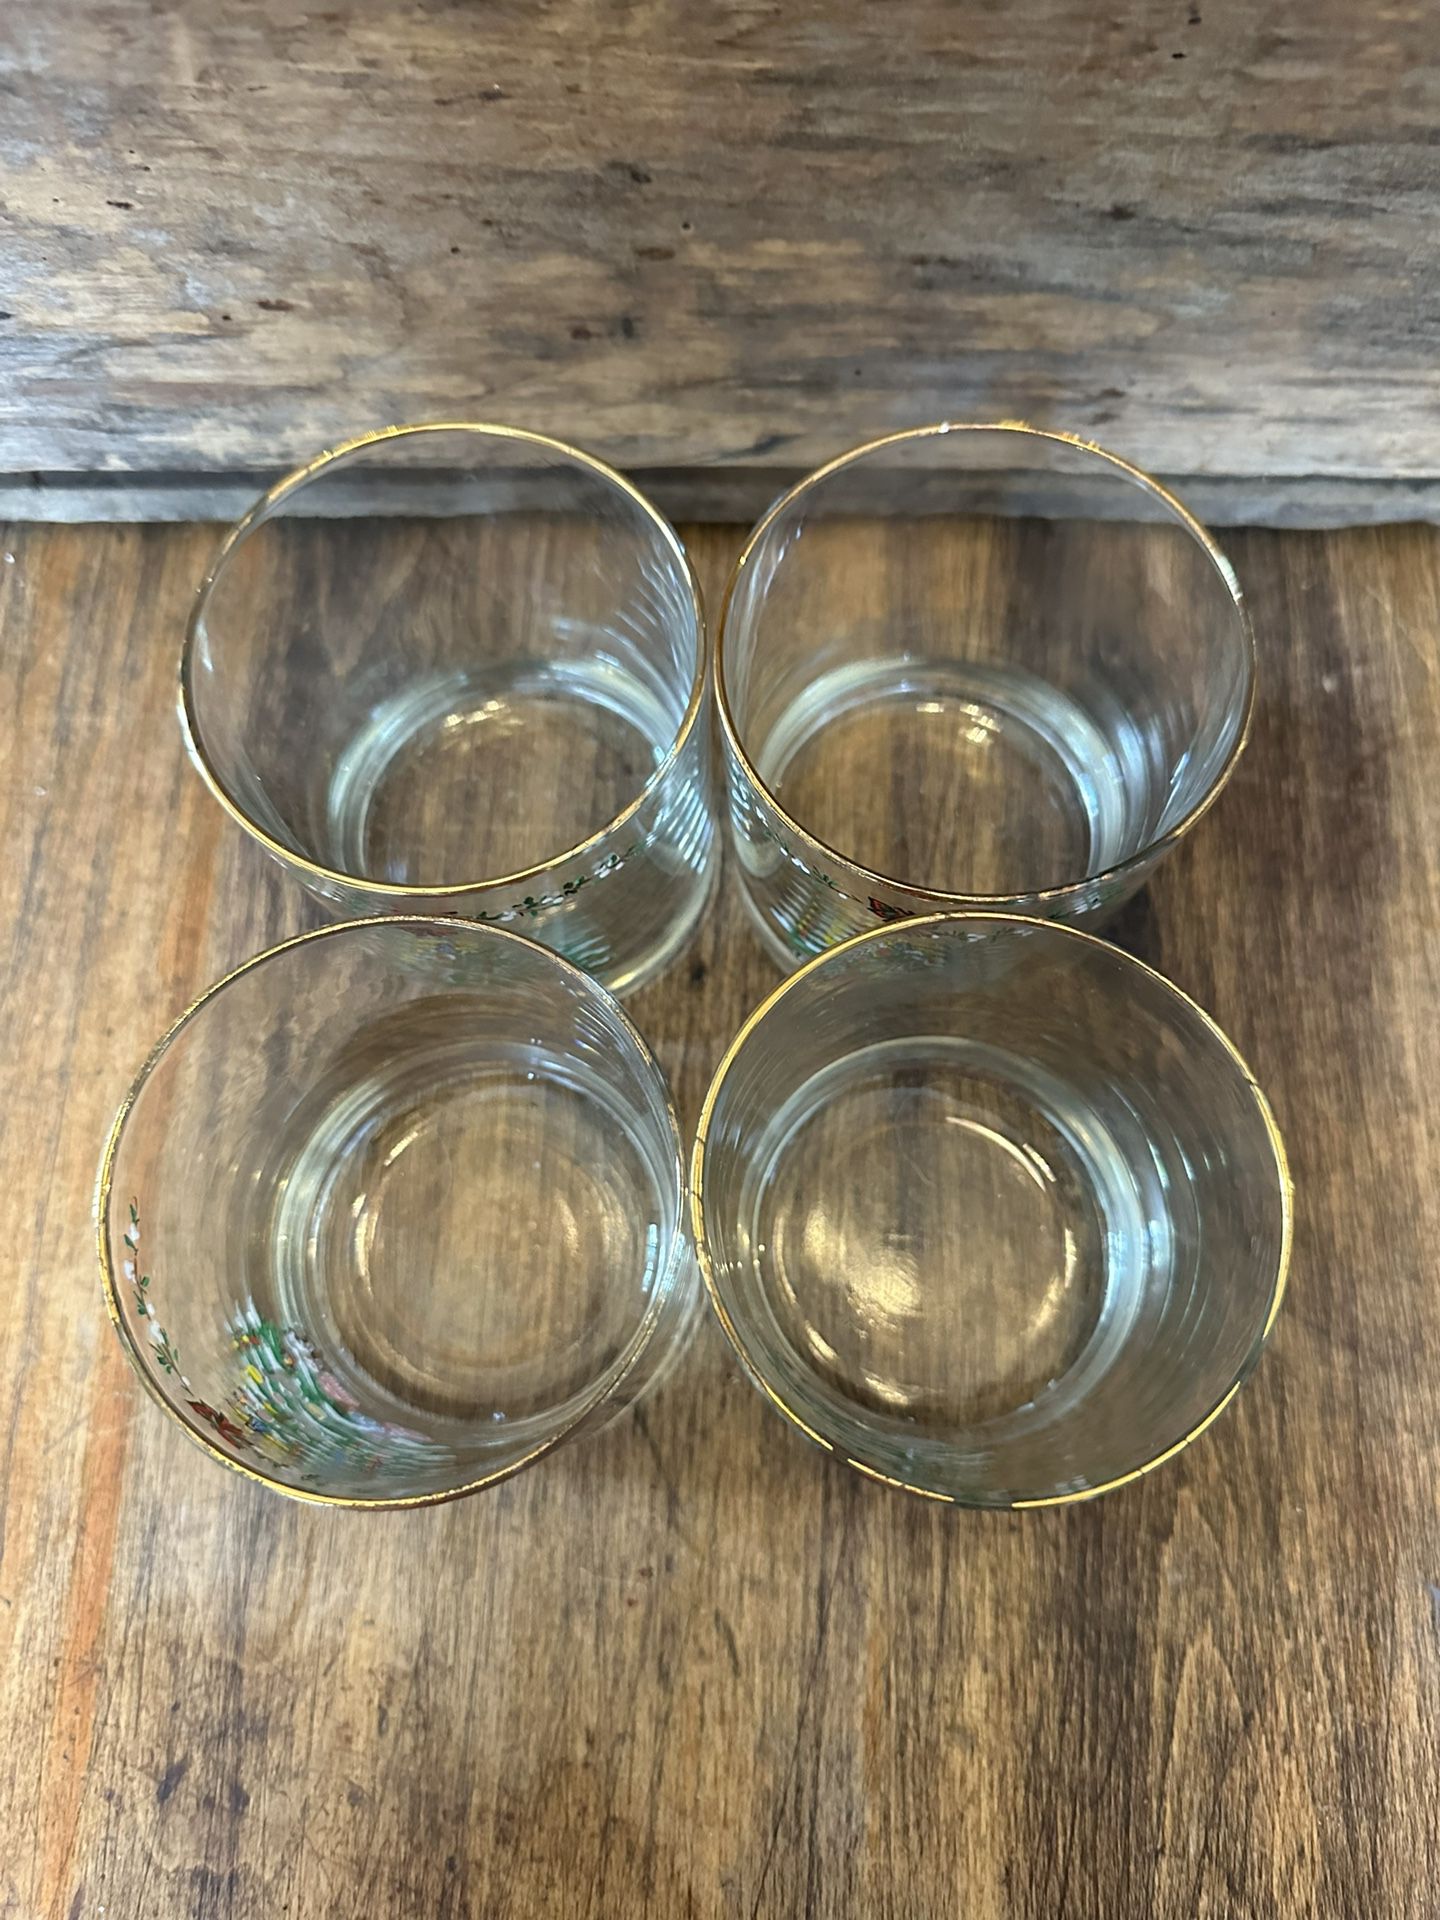 Gorham Set Of 4 Christmas Jewels Christmas Martini Glasses for Sale in  Centennial, CO - OfferUp